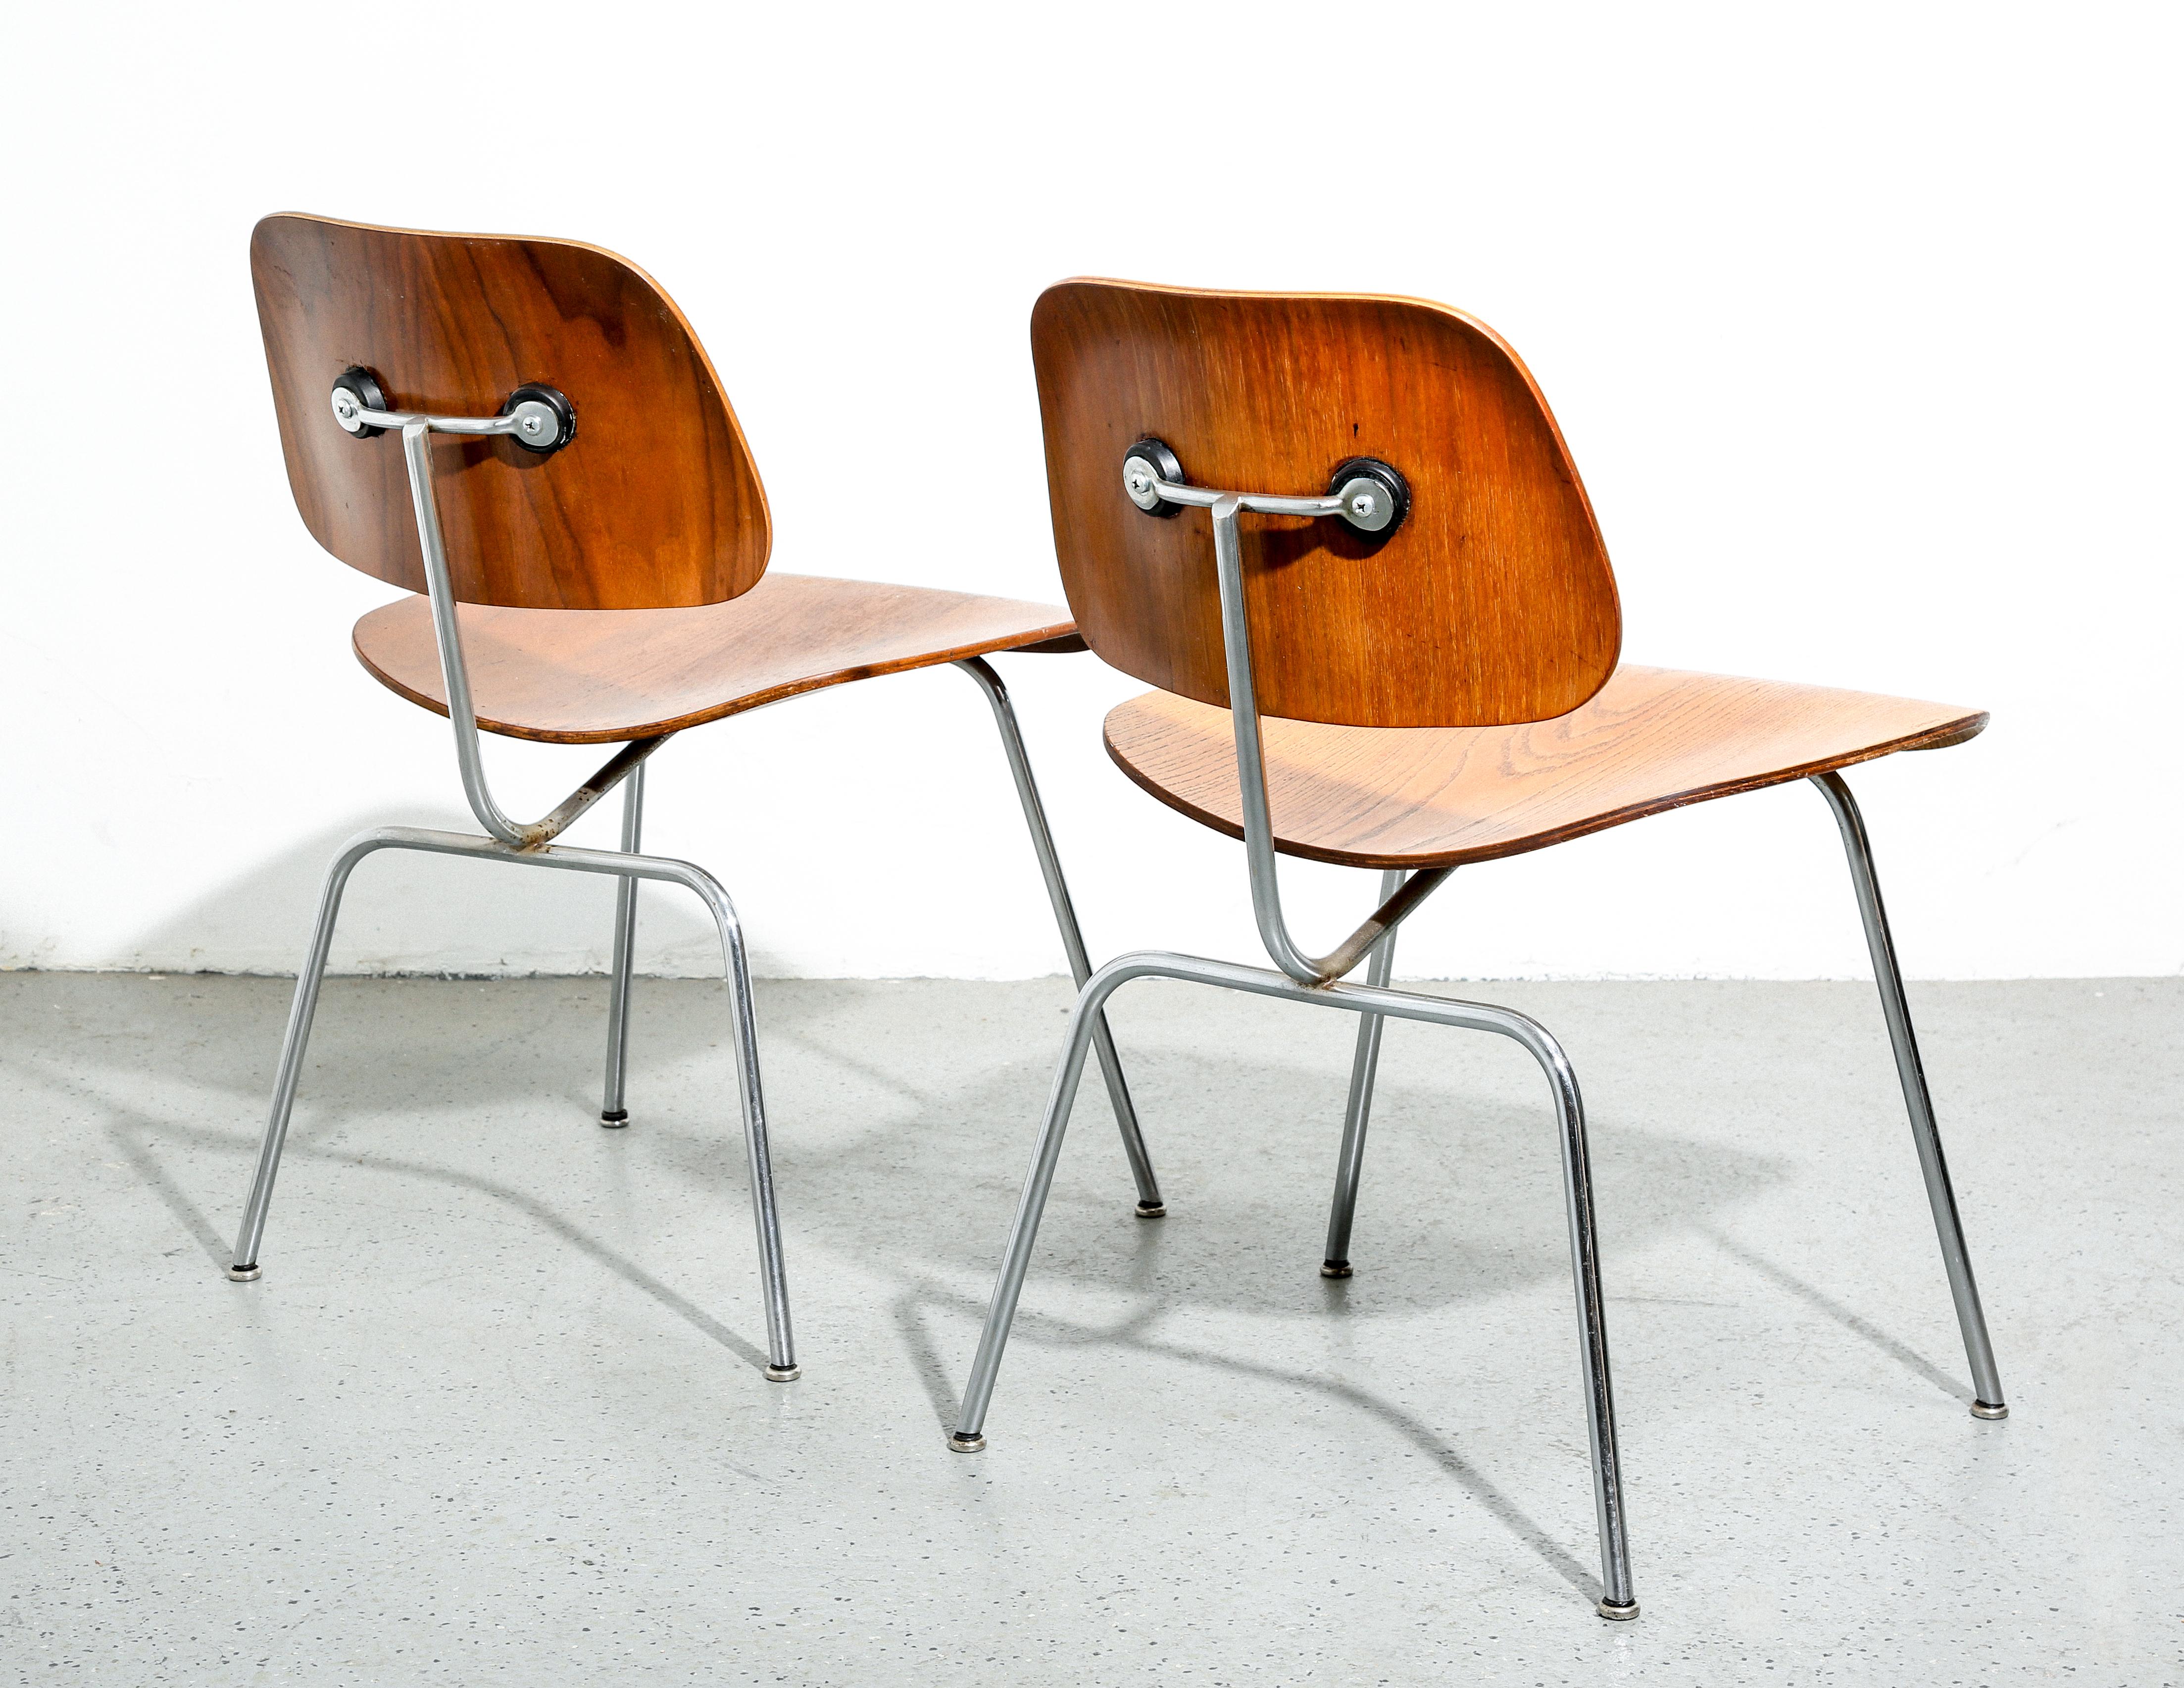 The first generation Eames DCM (Dining Chair Metal) chairs represent a landmark in furniture design, embodying the innovative spirit of mid-century modernism. Originally produced by the Adams Company in the early 1940s, these chairs were the